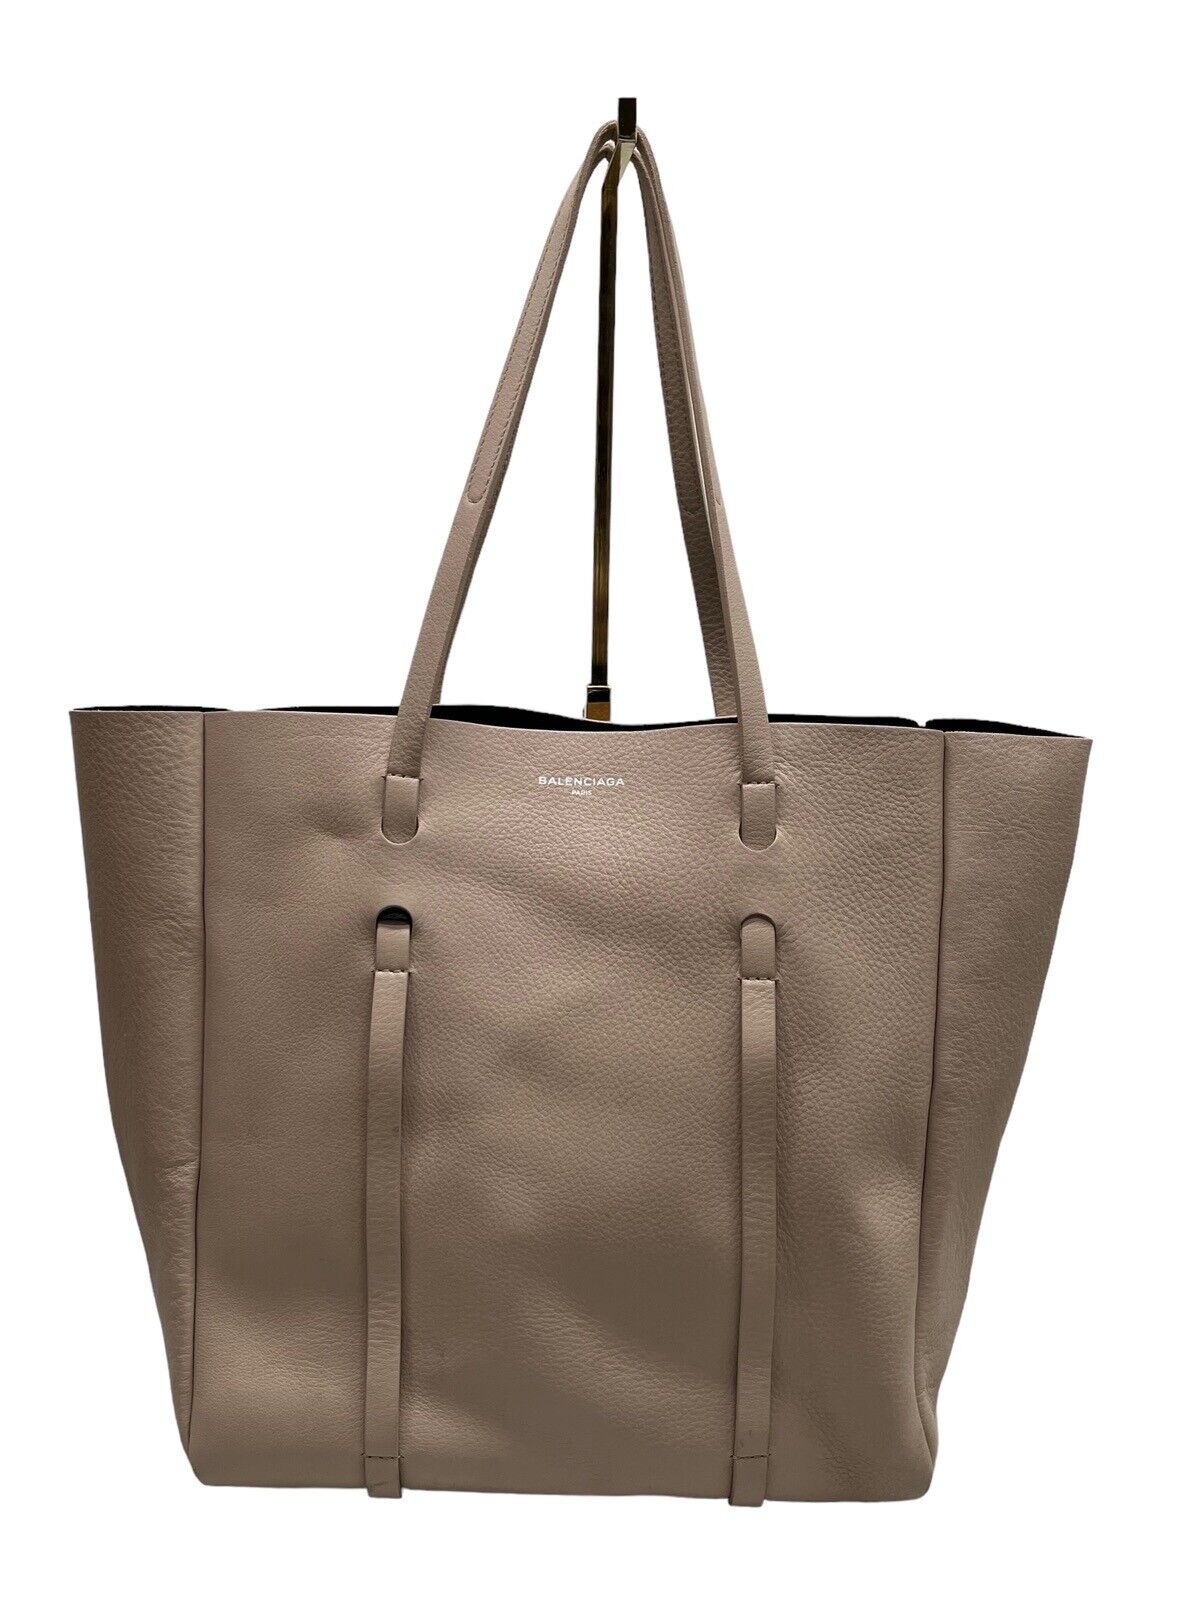 Authentic BALENCIAGA Everyday Tote Bag BEIGE LEATHER 46622